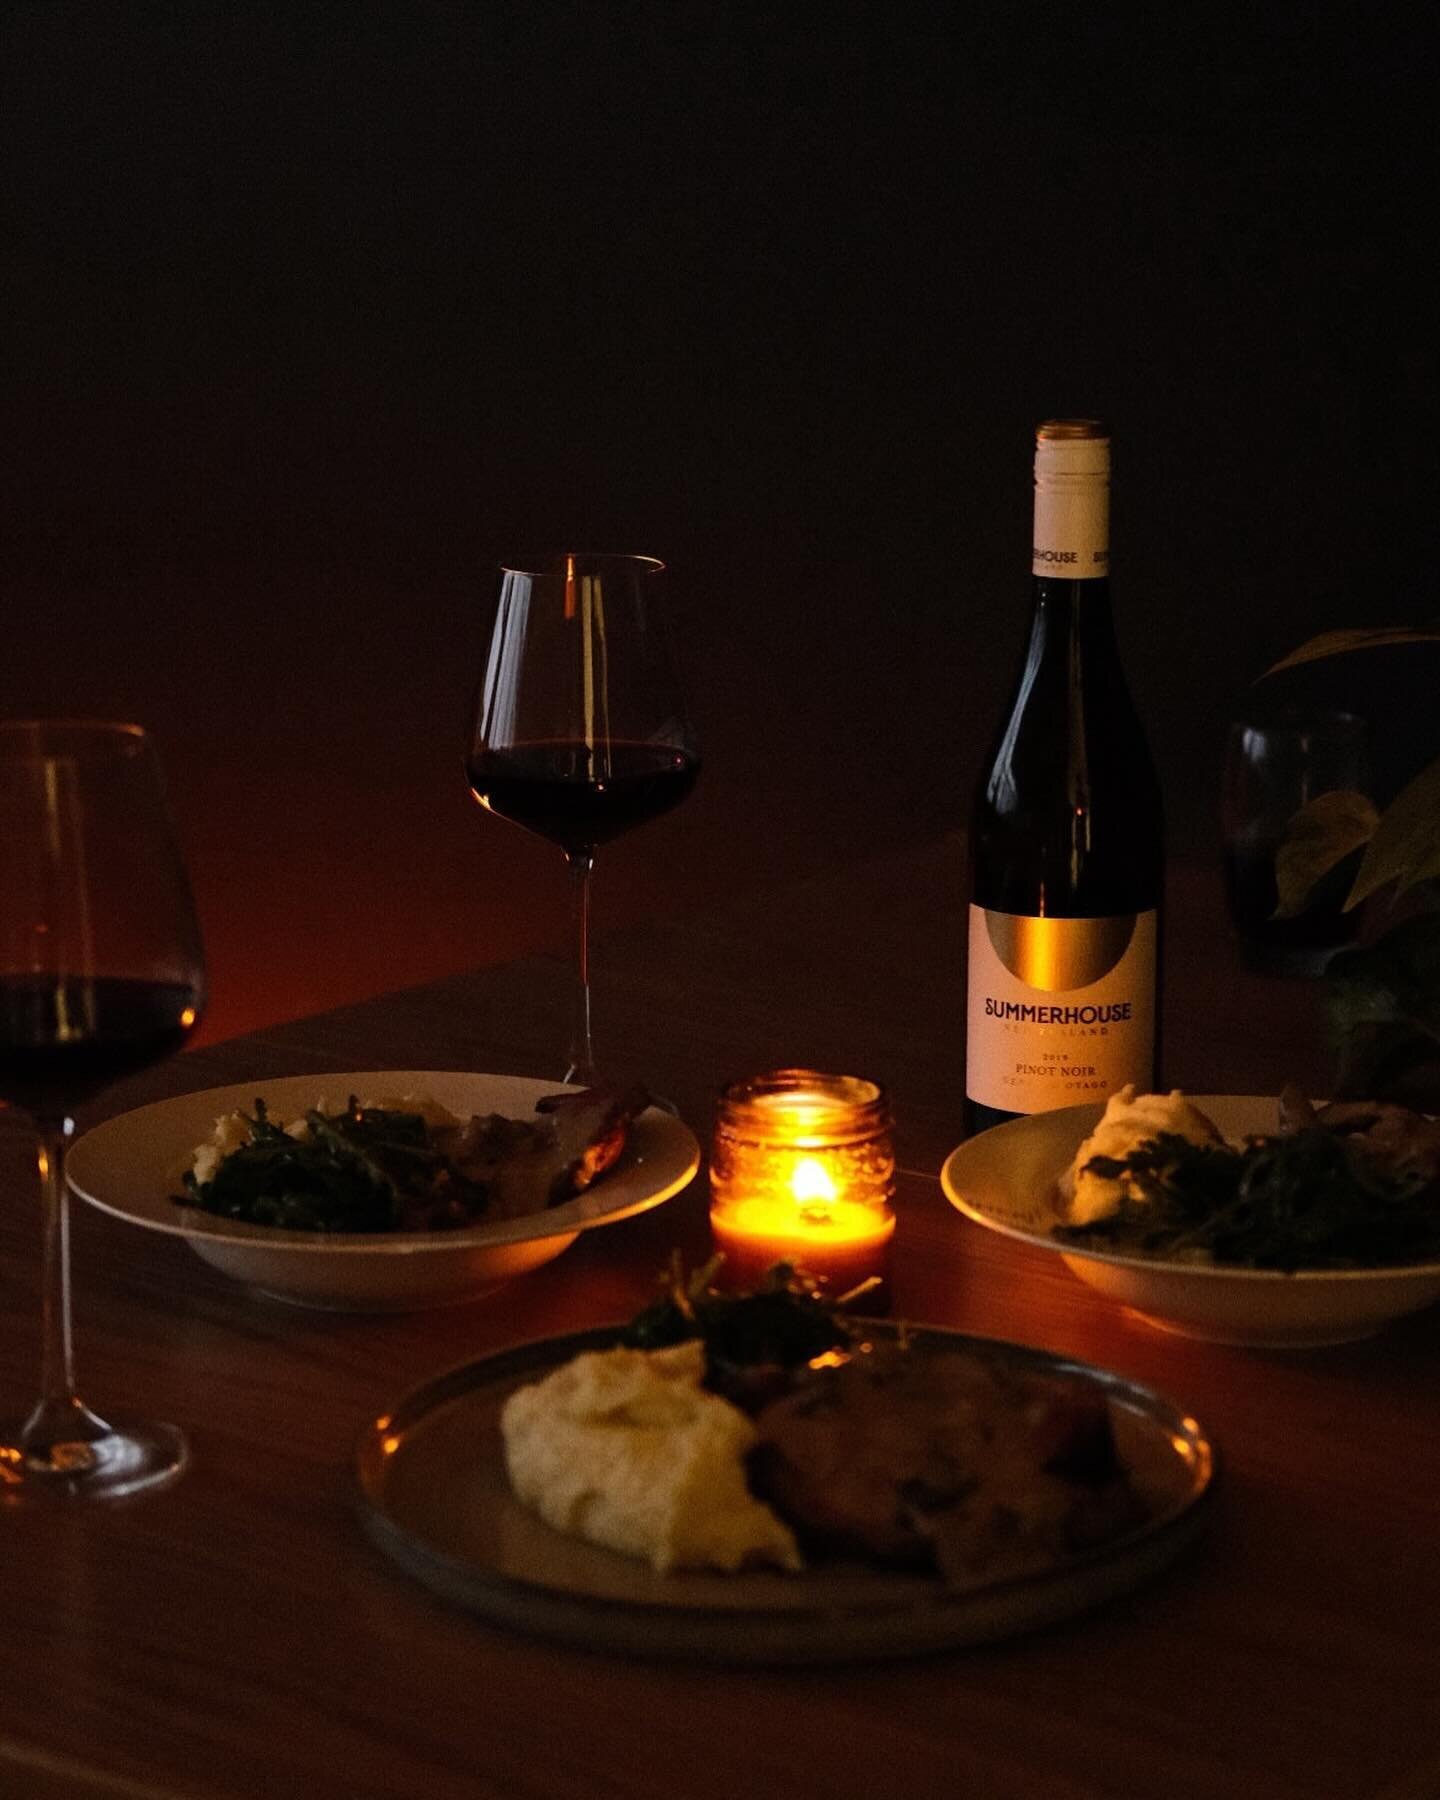 A delicious meal captured by @ignastosan 📷️⁠
Home-cooked beef steak with a mushroom sauce and mashed potatoes, matched with our Pinot Noir 🍷⁠
.⁠
.⁠
.⁠
.⁠
#Summerhousewine #nzwine #nzpinotnoir #nightsin